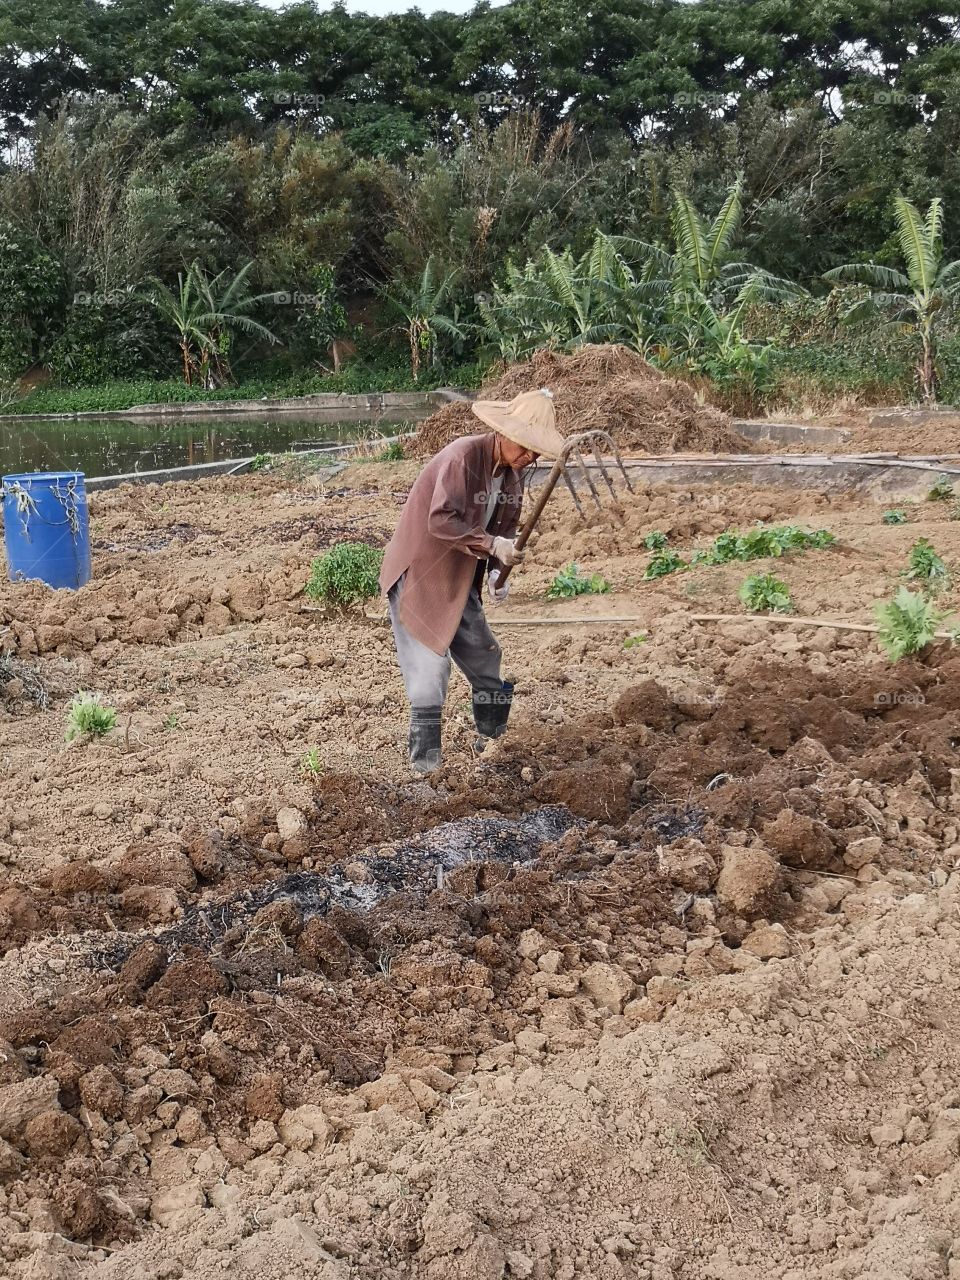 My grandfather is working hard on his farm